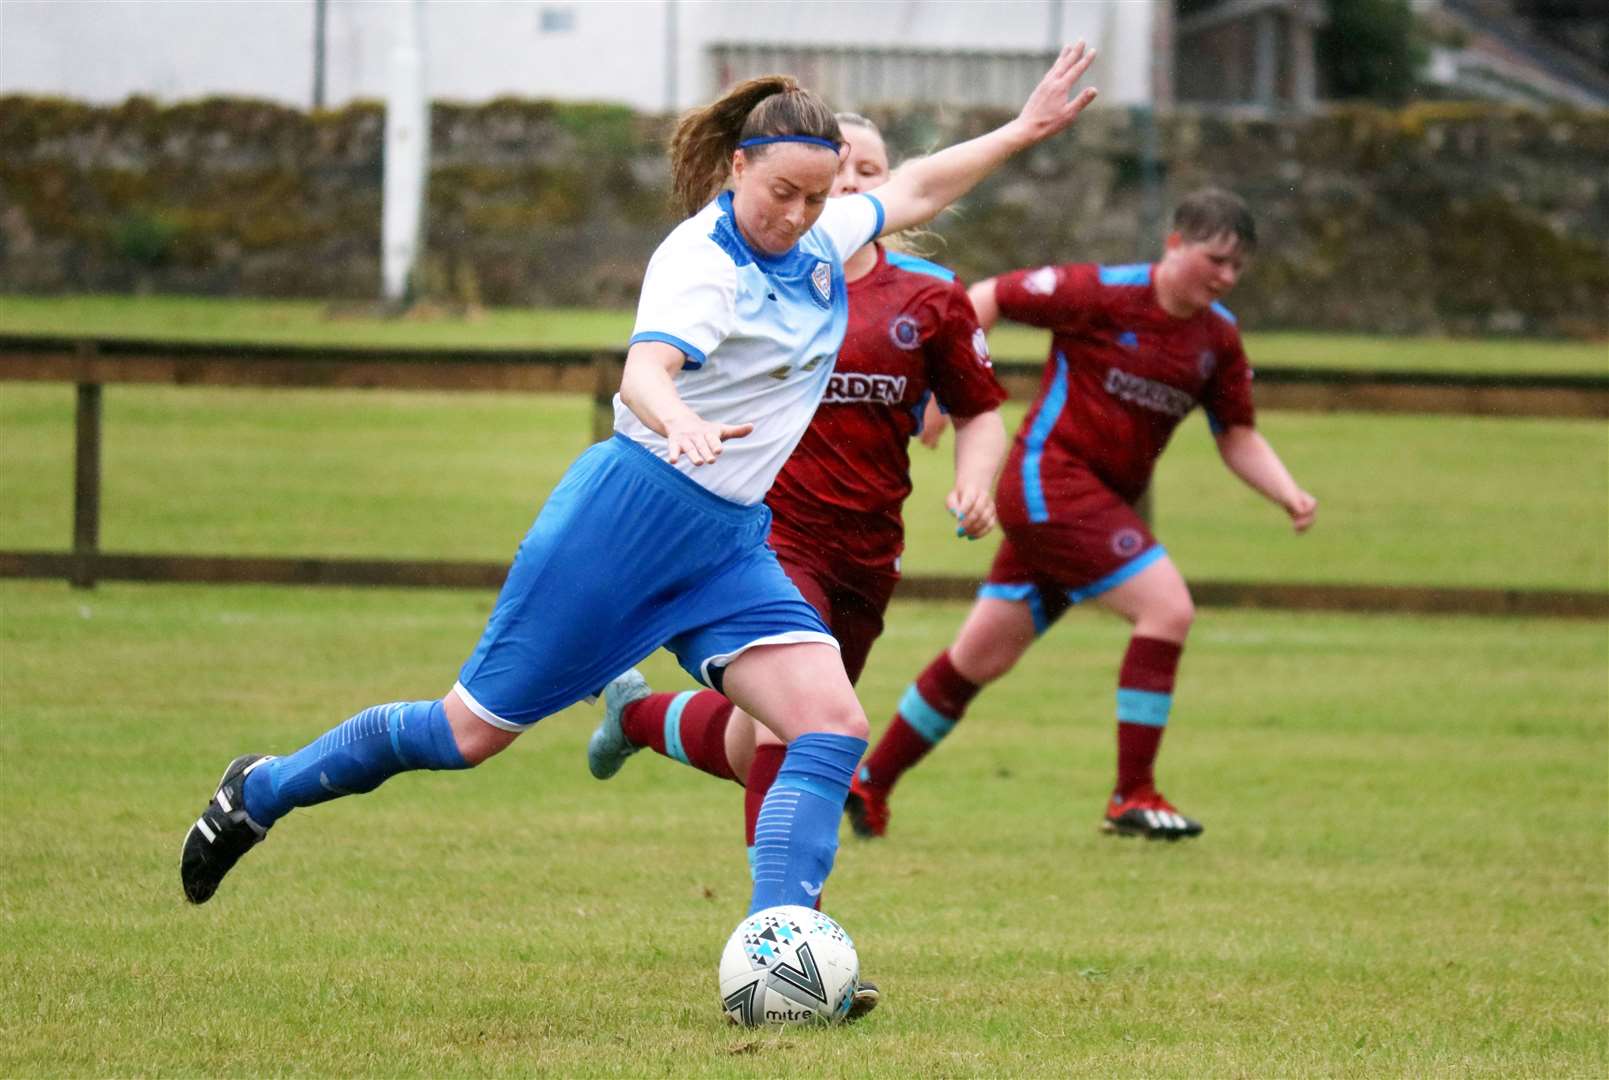 Tracey-Anne Montgomery scored a hat trick. Picture: James Mackenzie..